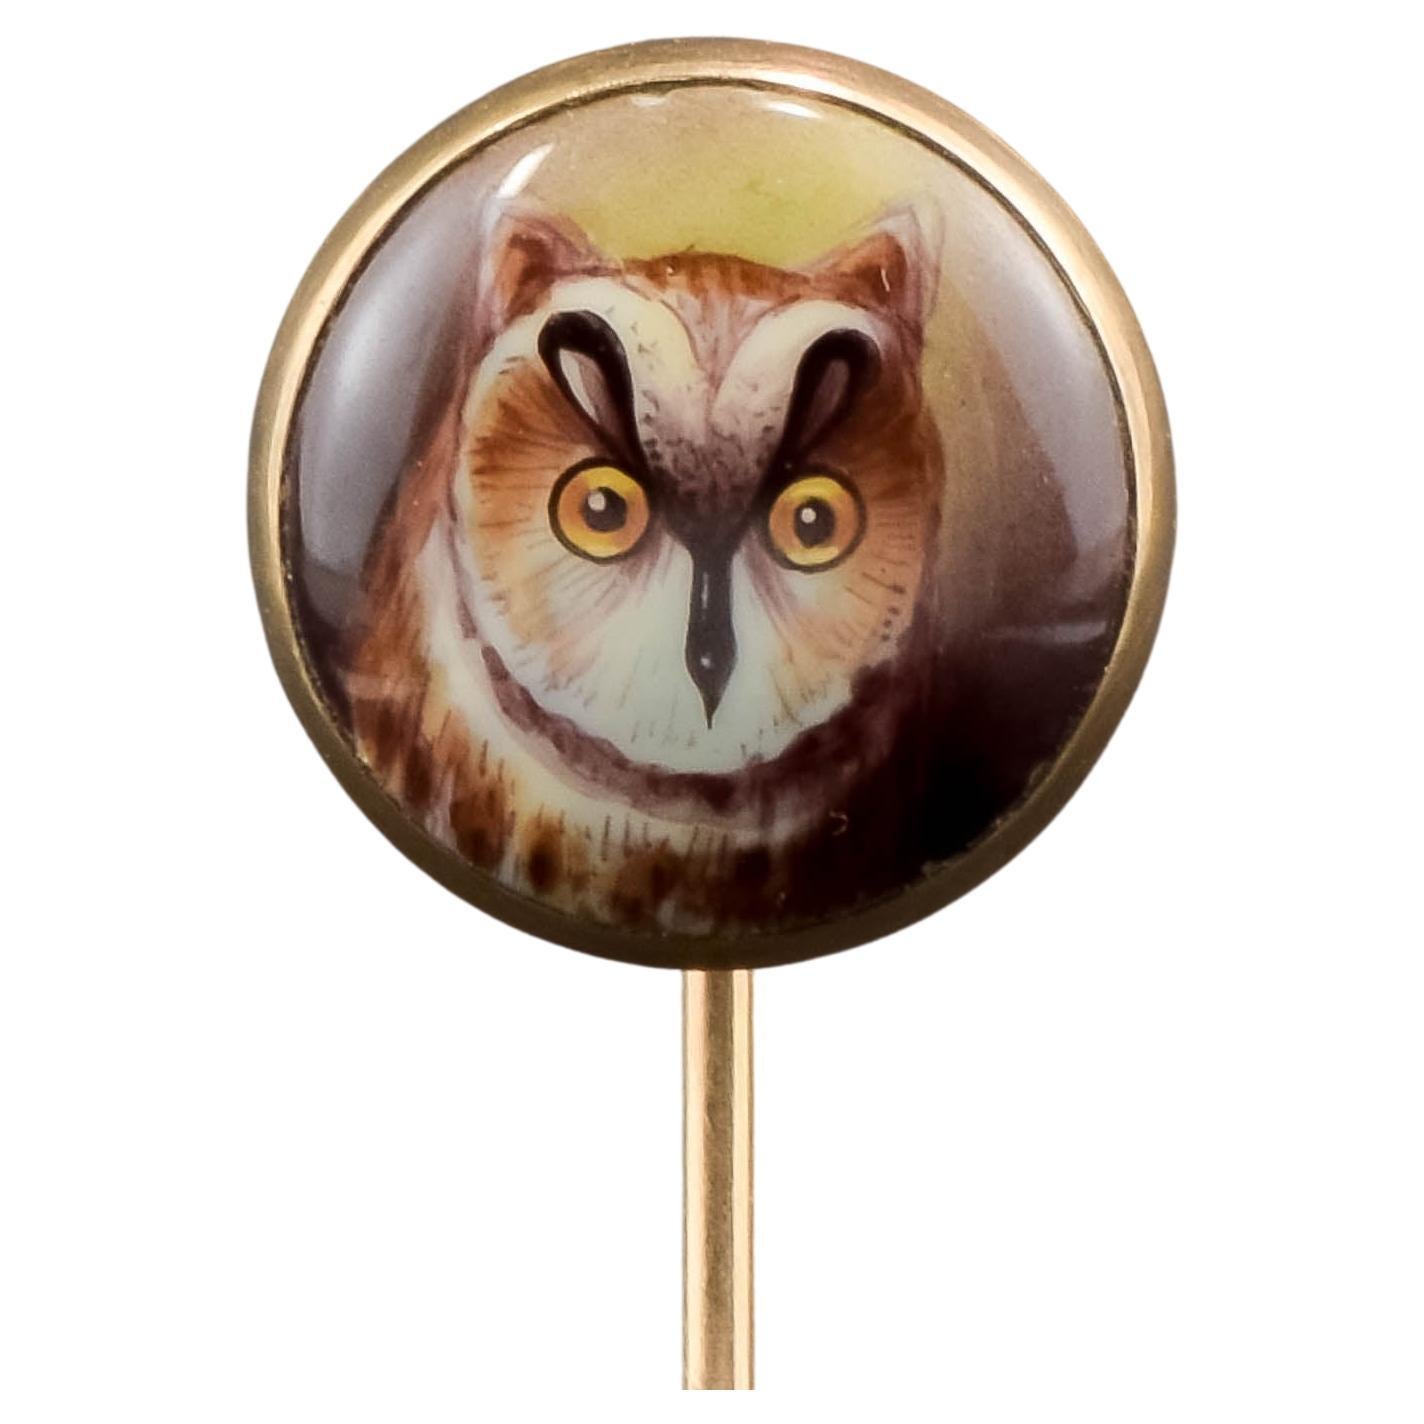 Antique Hand Painted Owl Portrait Stick Pin - Cravat Pin in Gold For Sale